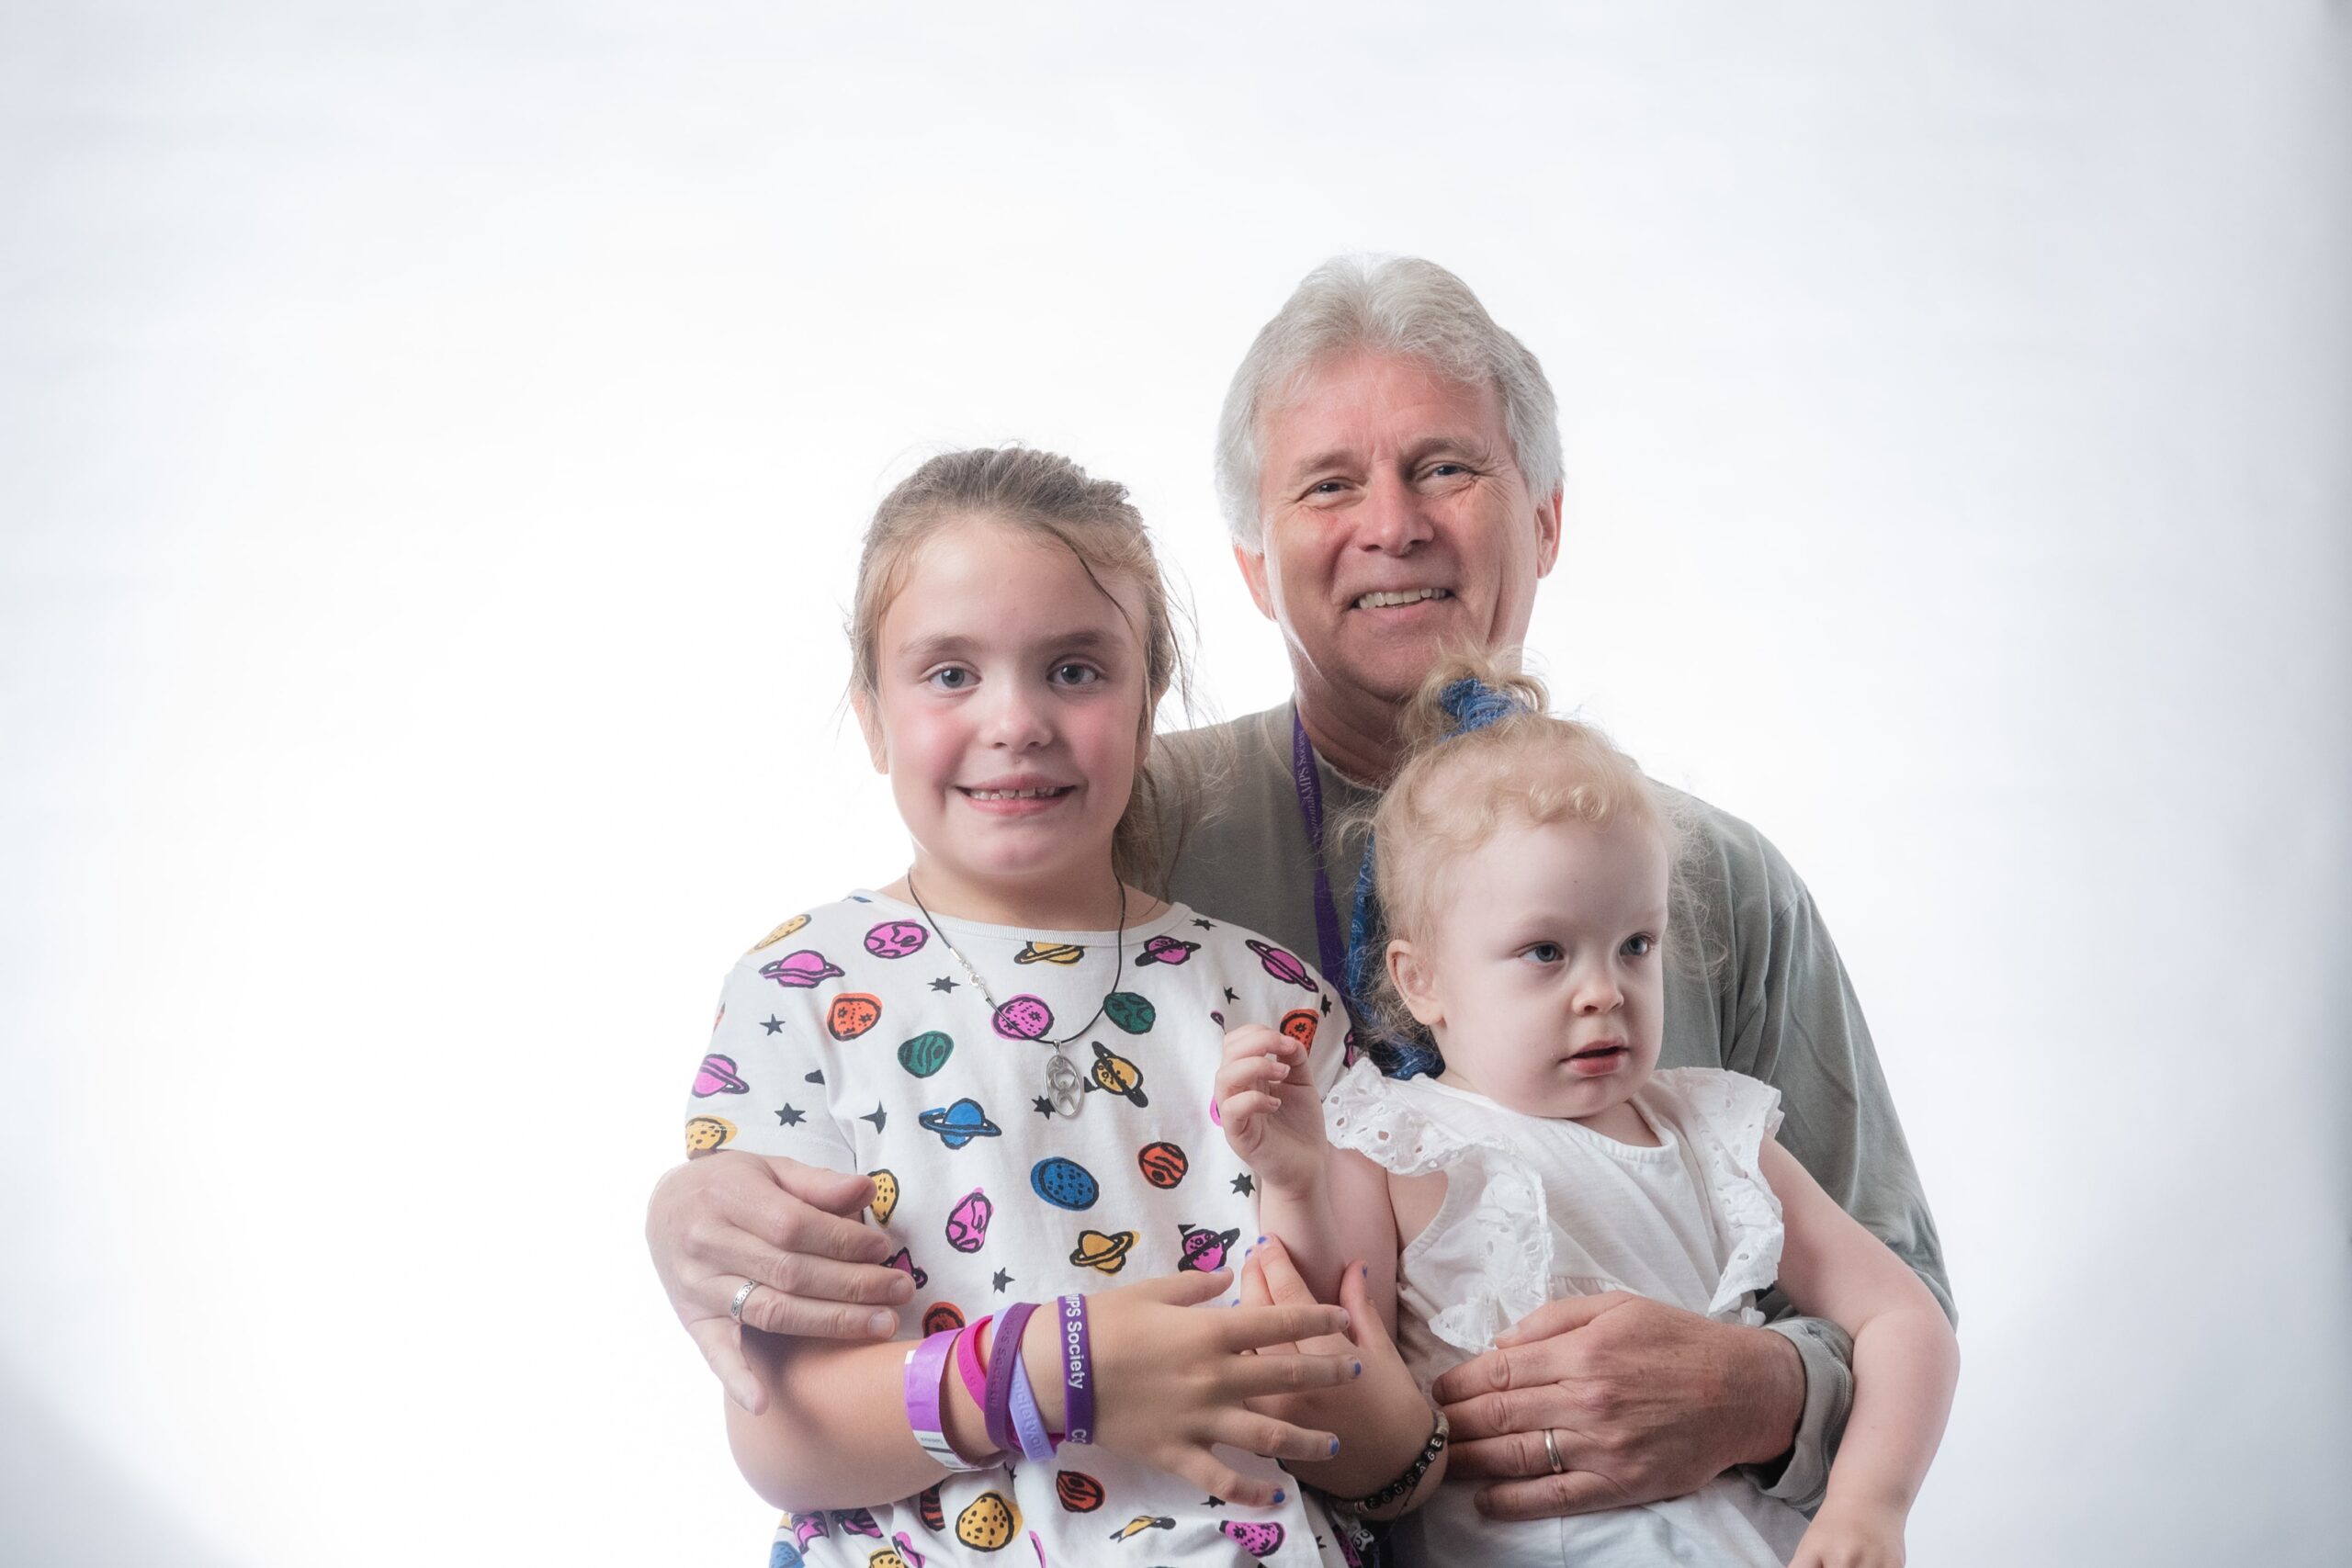 Family of 3 poses for a portrait against a white backdrop